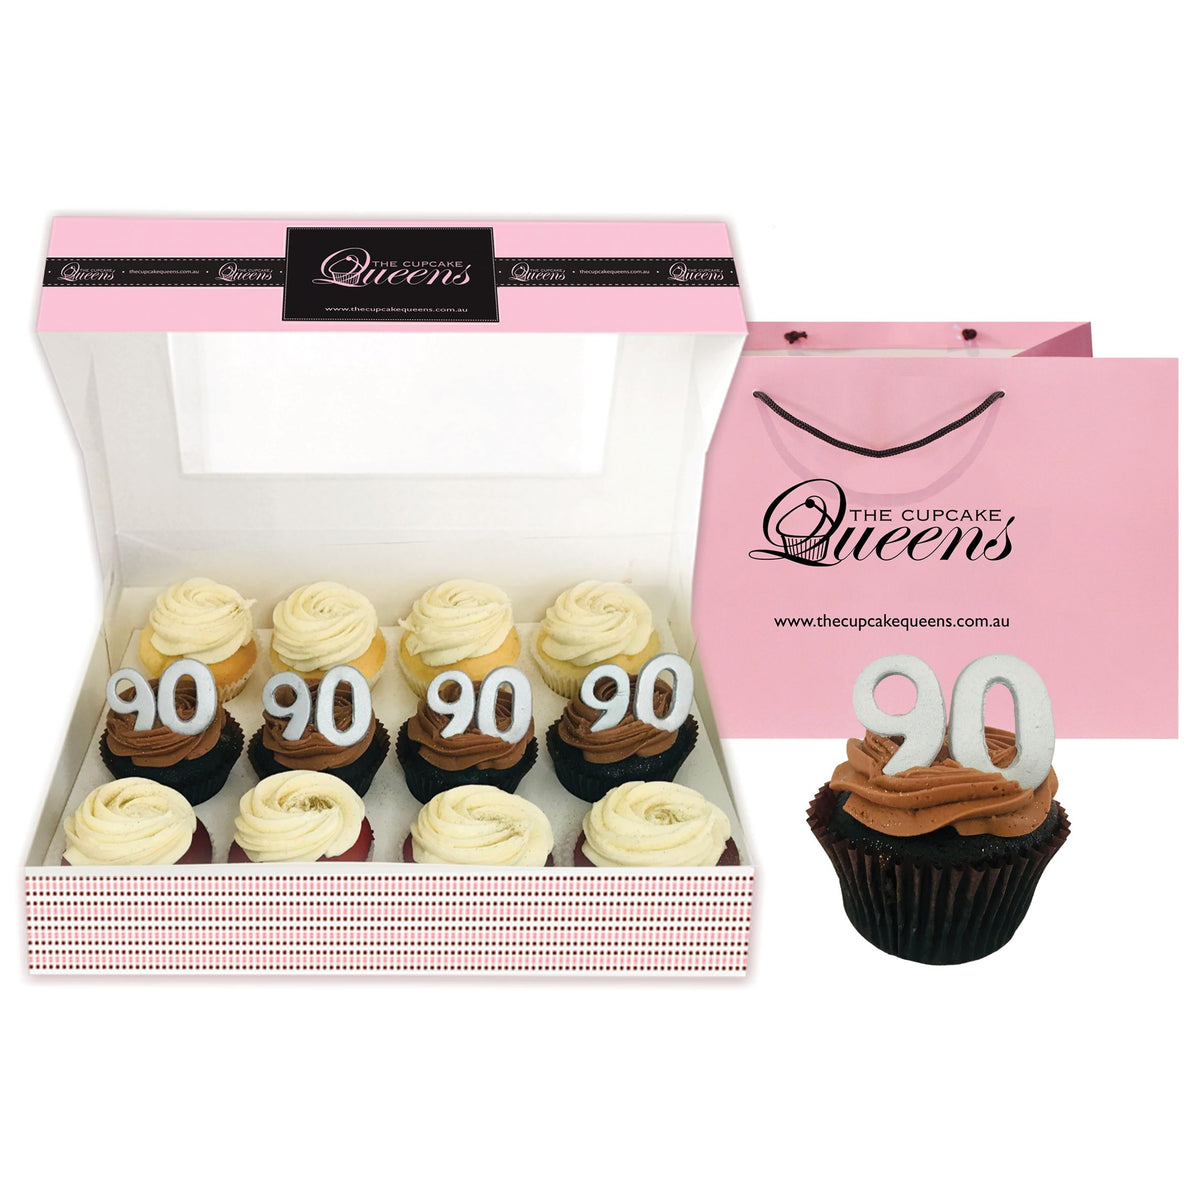 90th Birthday Cupcakes in SILVER Cupcakes The Cupcake Queens 